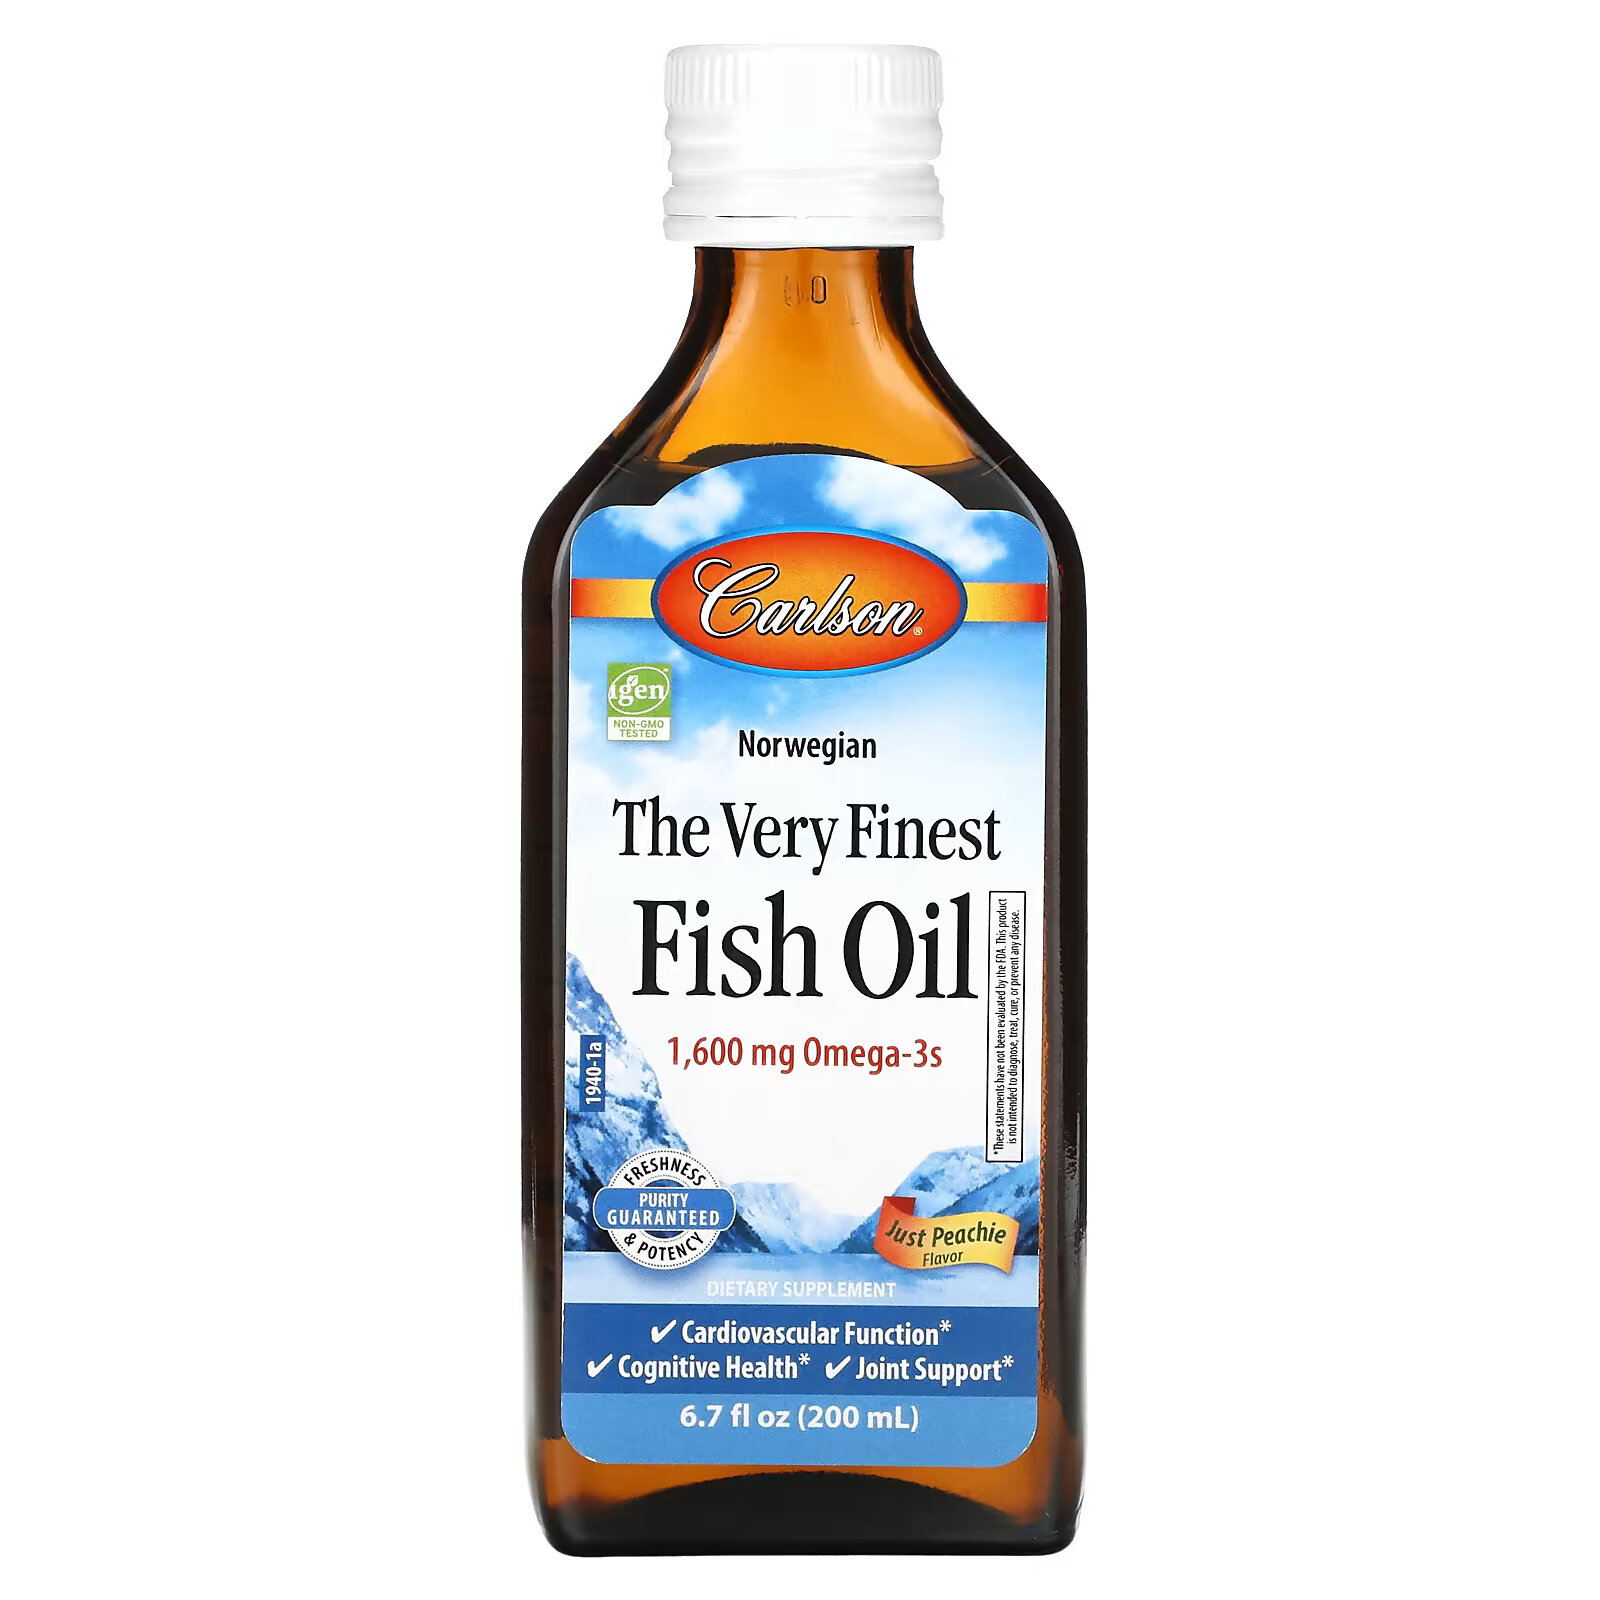 Carlson, The Very Finest Fish Oil, Just Peachie, 1,600 mg, 6.7 fl oz (200 ml) carlson kids the very finest fish oil natural mixed berry 800 mg 6 7 fl oz 200 ml